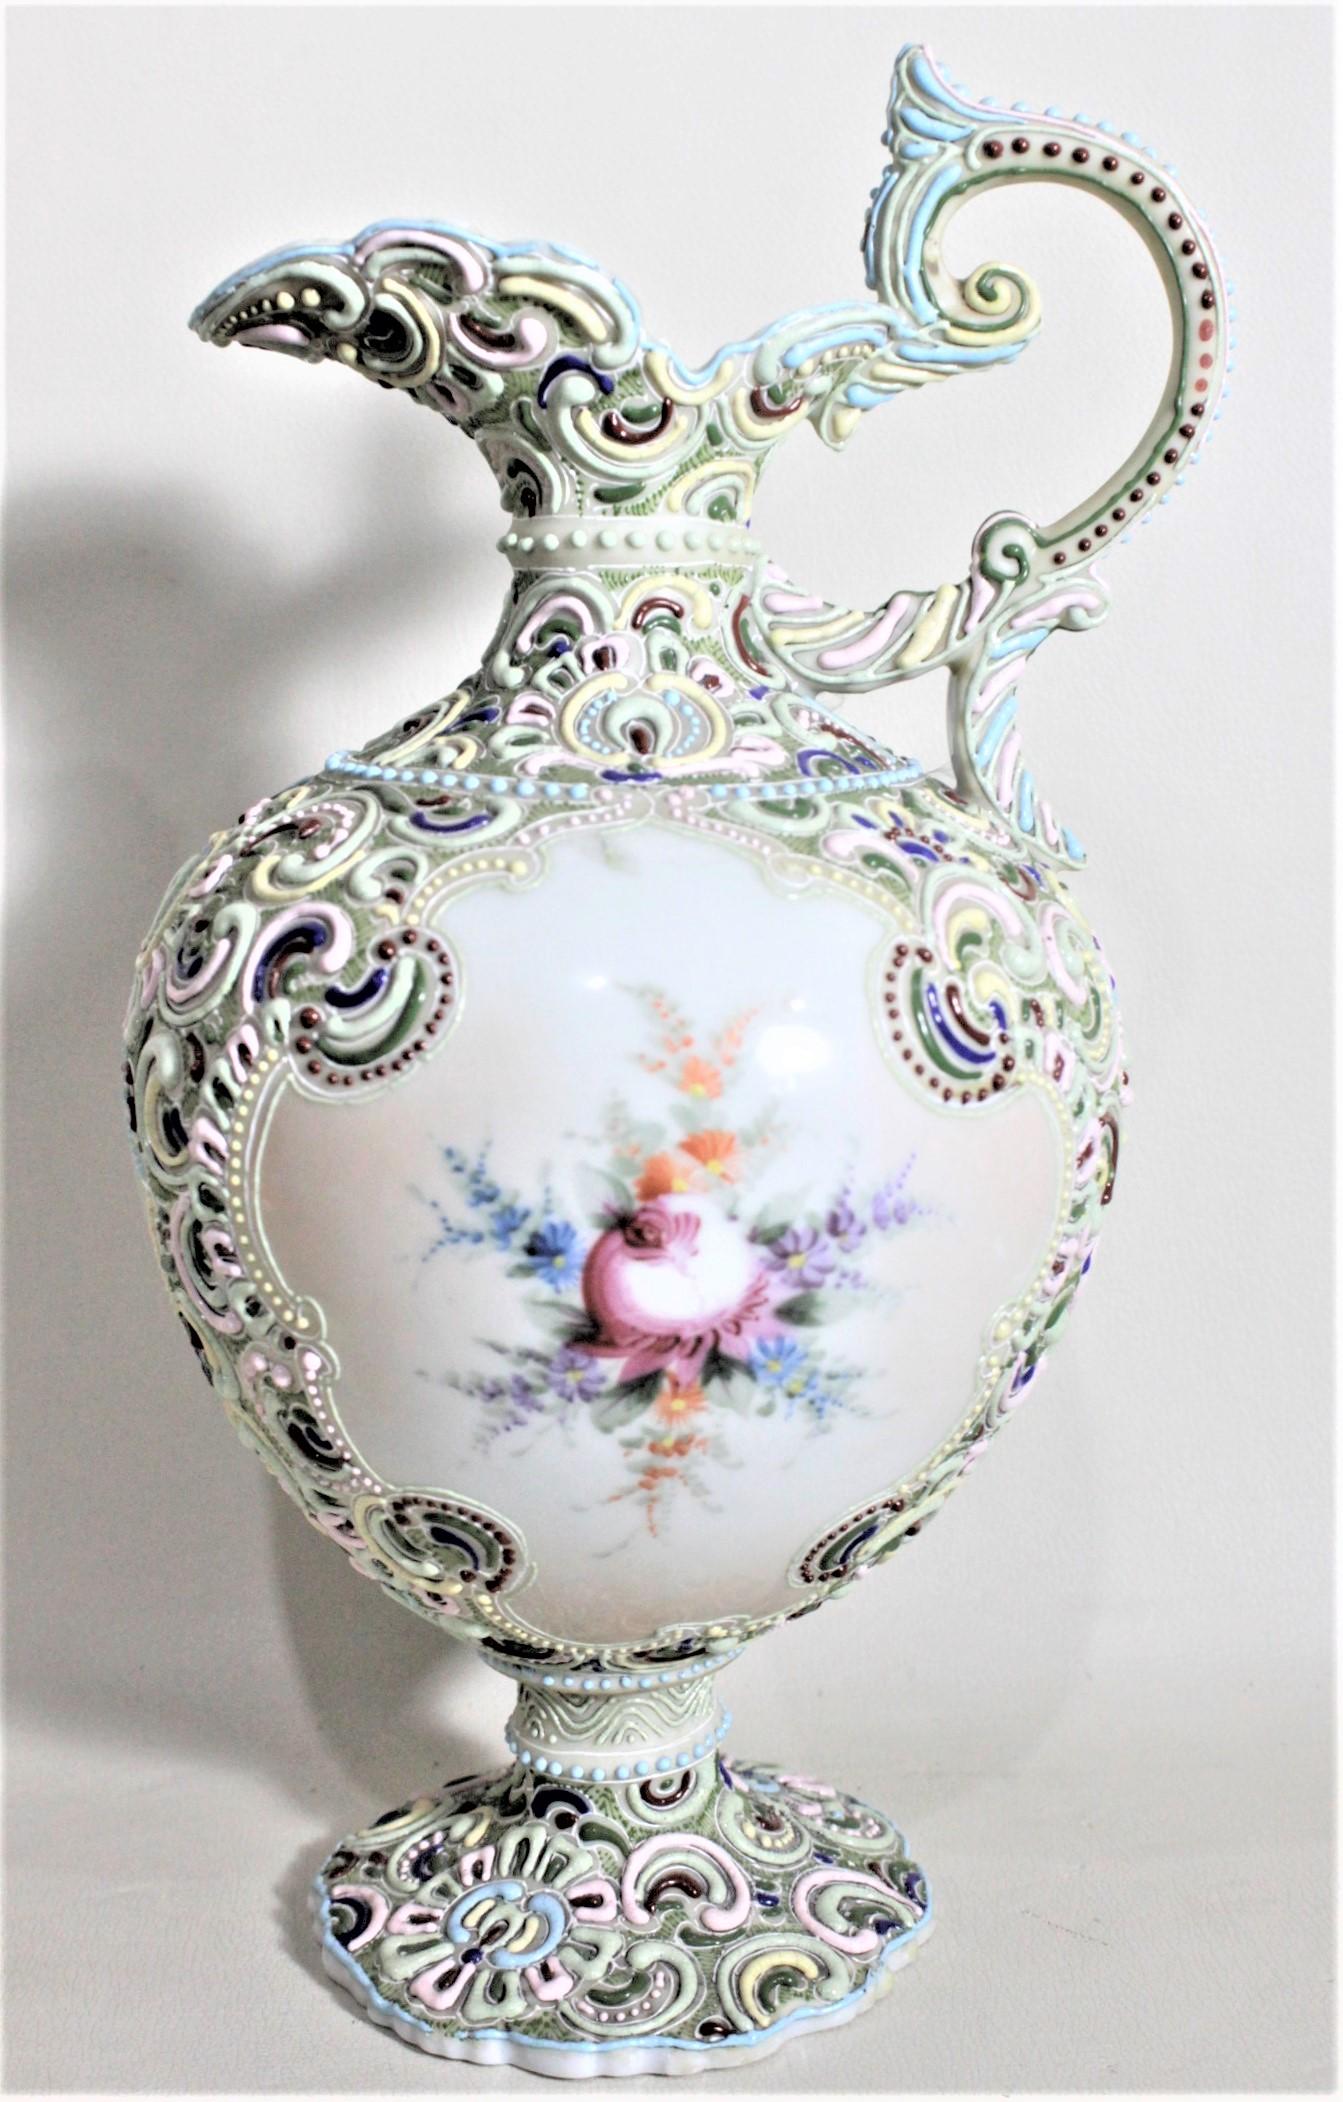 This large antique and ornately decorated ewer is unsigned, but believed to have been made by the Nippon Company of Japan in approximately 1900 in an Anglo-Japanese style. The pitcher is very ornately decorated with raised or moriage decoration in